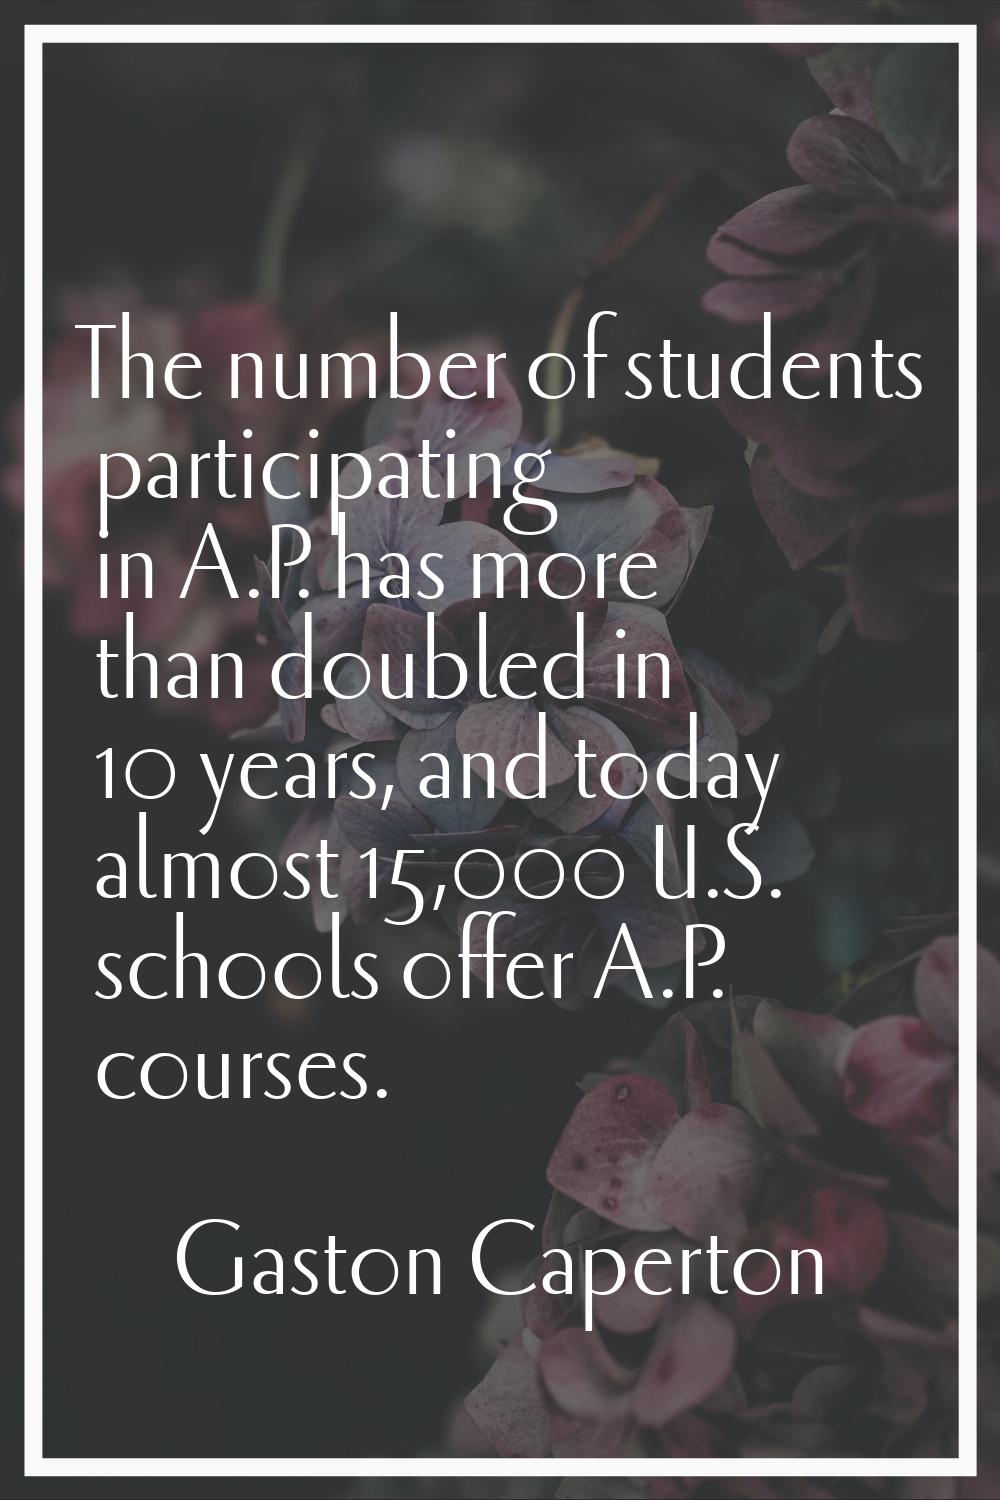 The number of students participating in A.P. has more than doubled in 10 years, and today almost 15